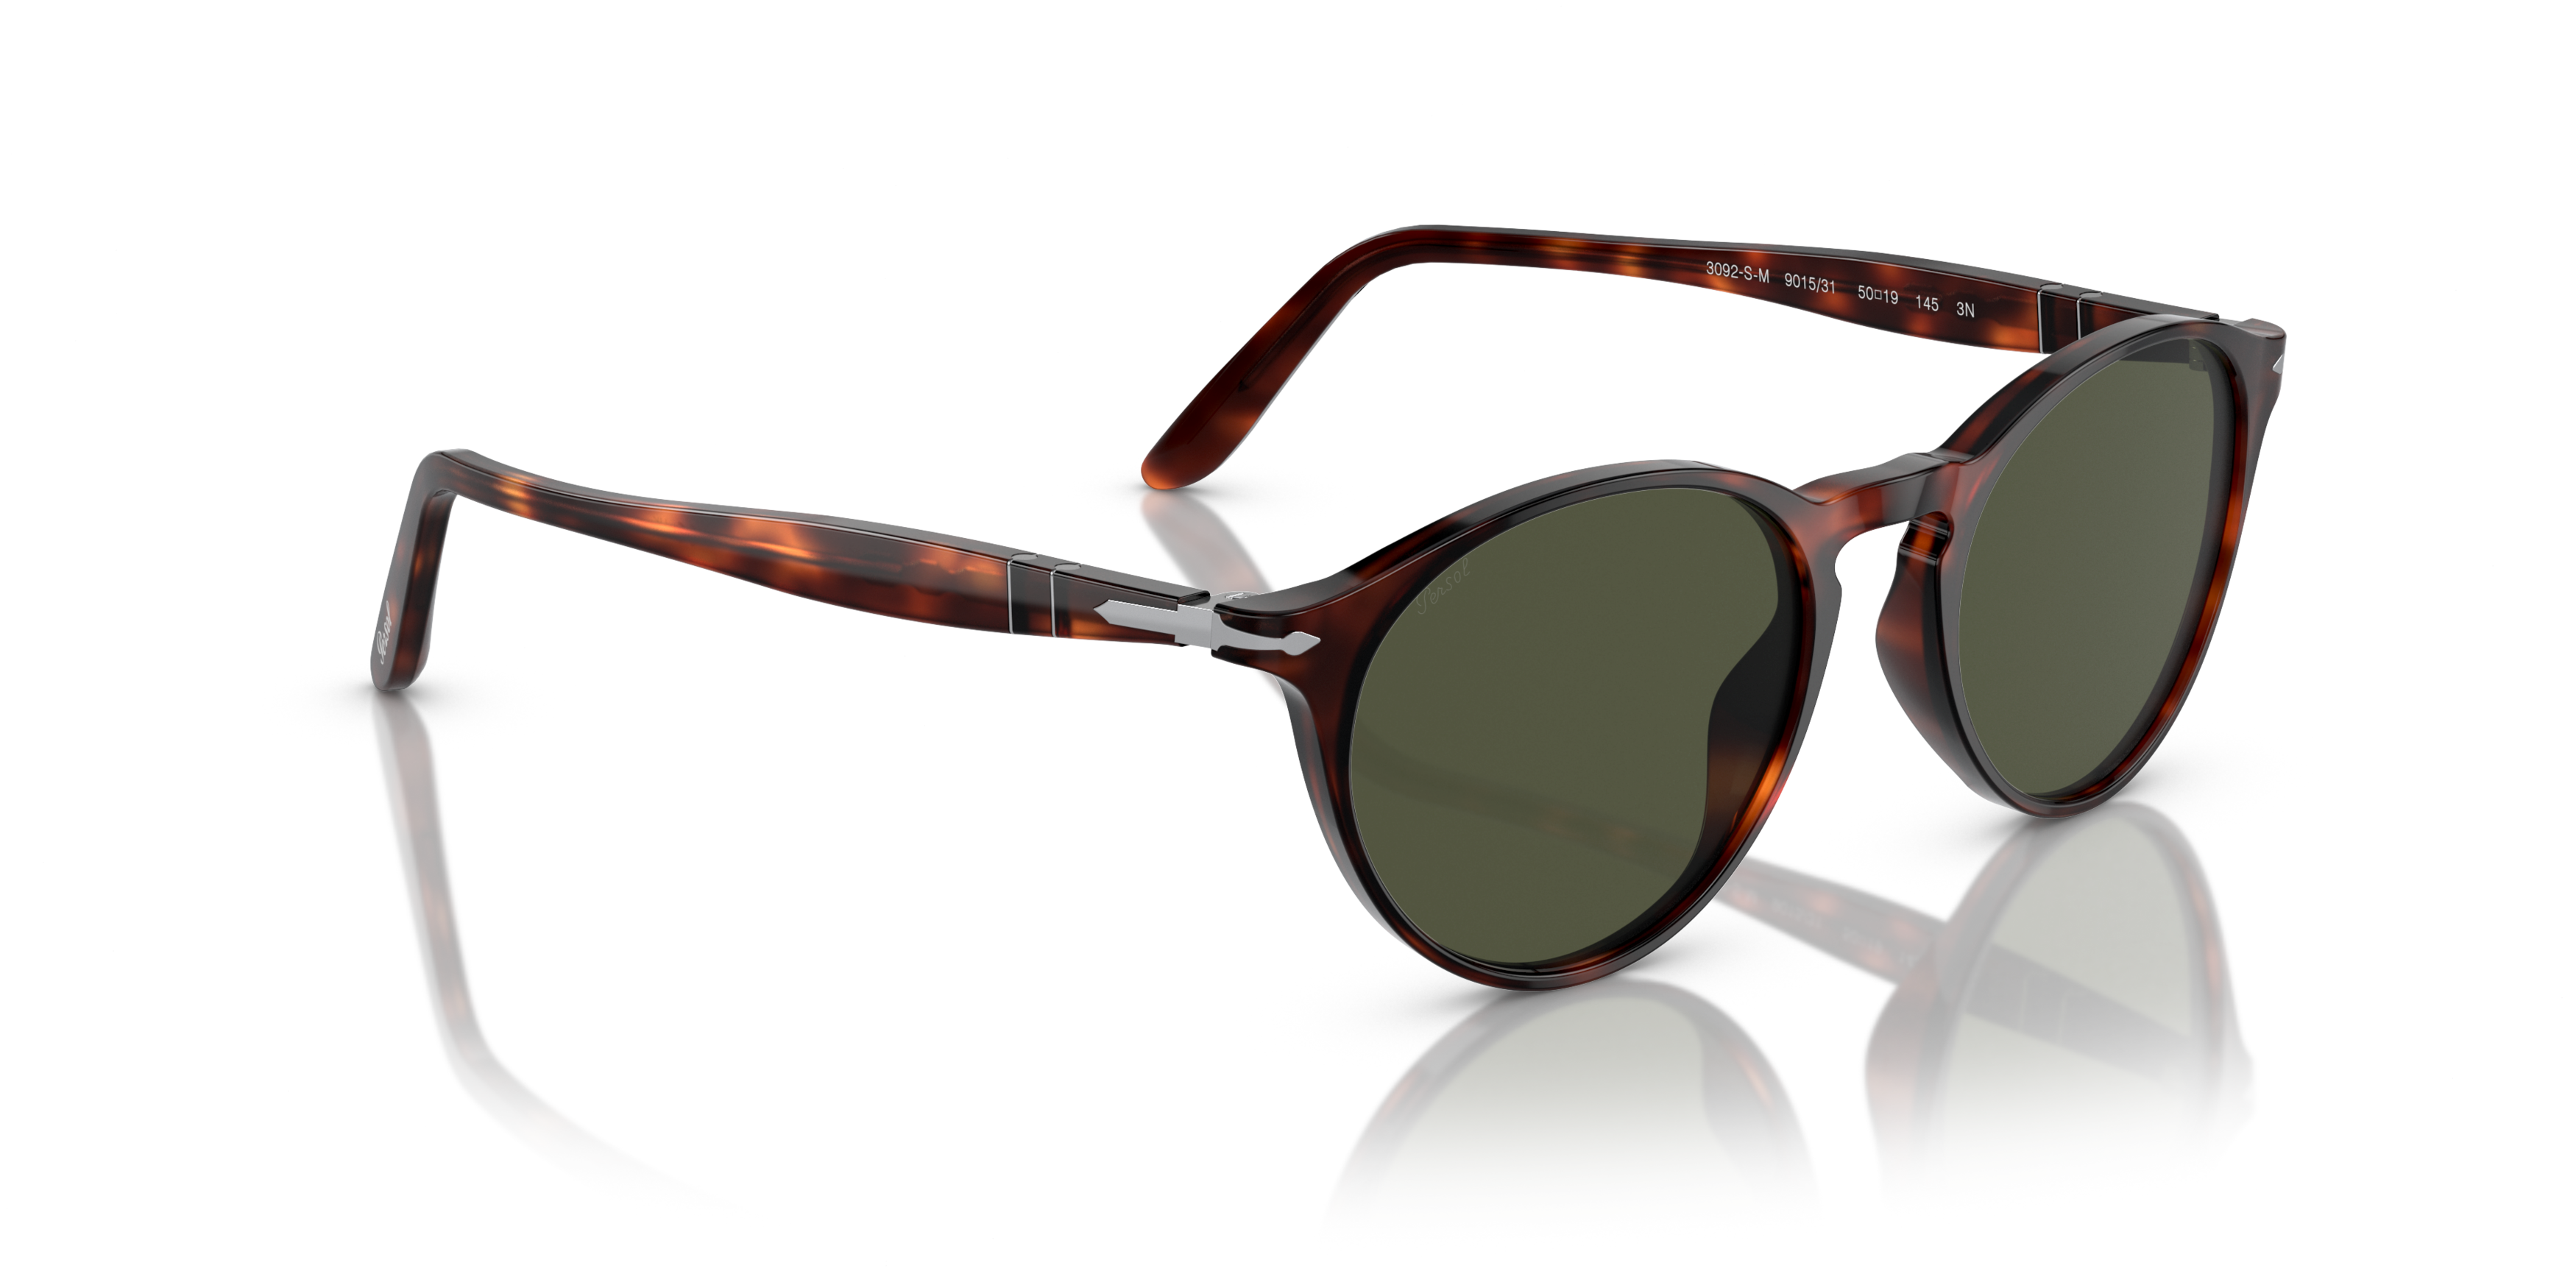 [products.image.angle_right01] Persol PO3092SM 901531